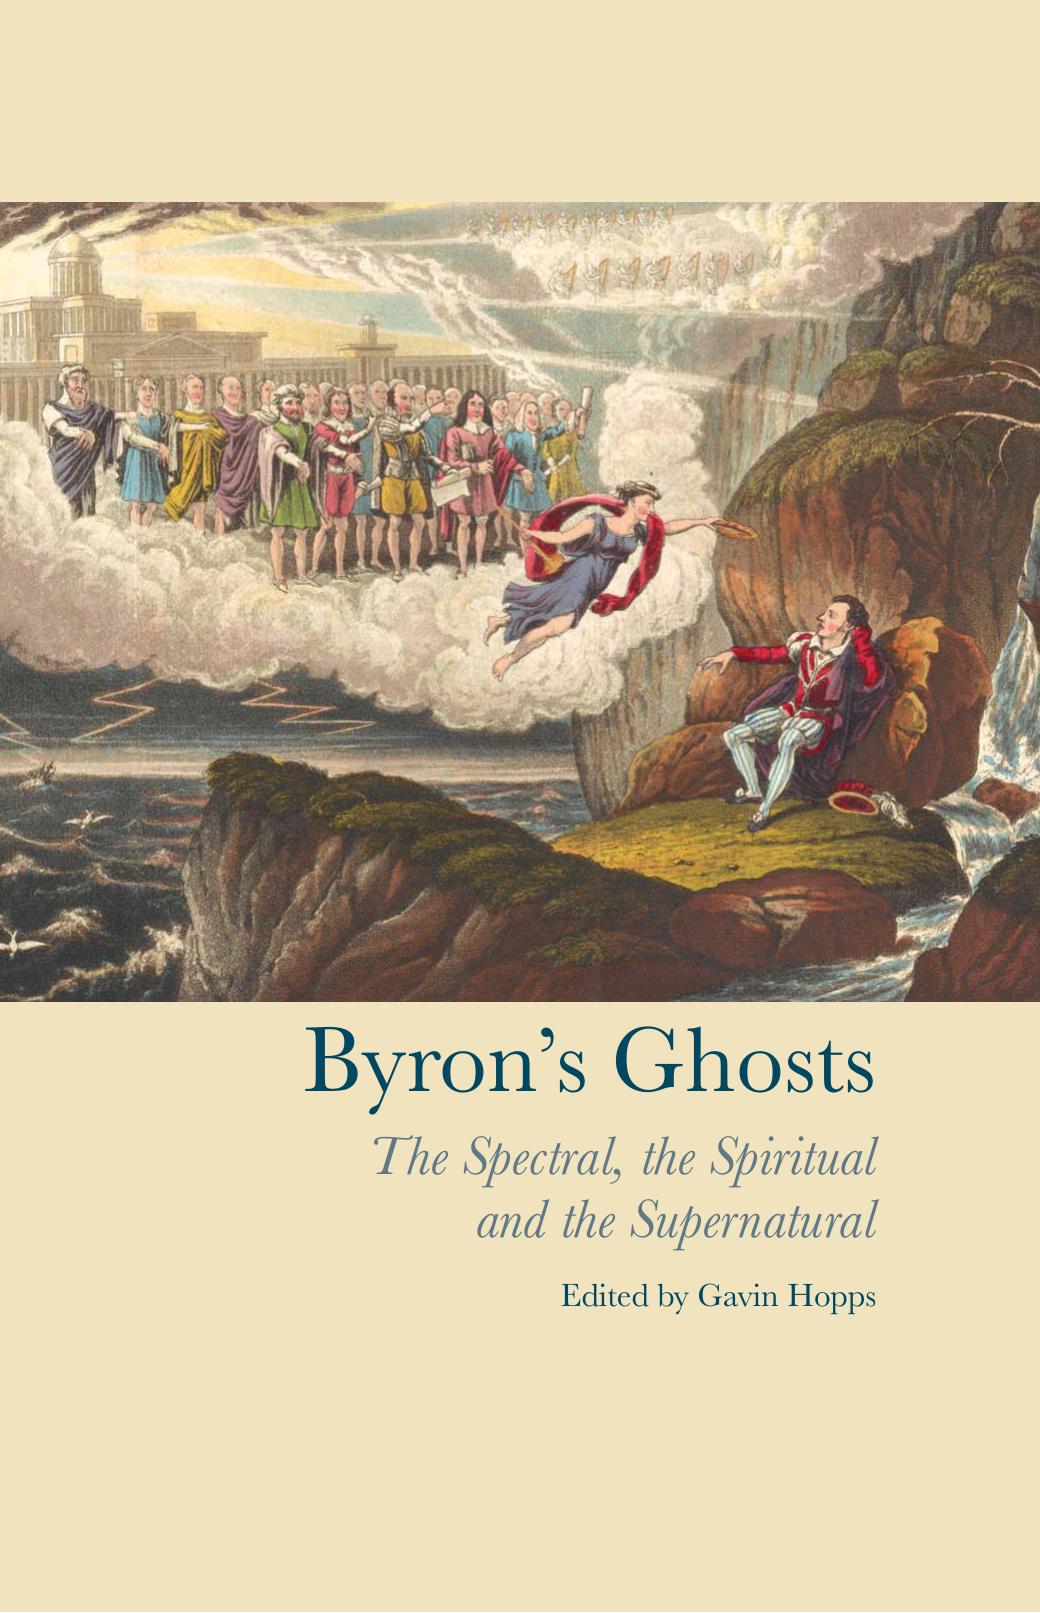 Byron's Ghosts : The Spectral, the Spiritual and the Supernatural by Gavin Hopps